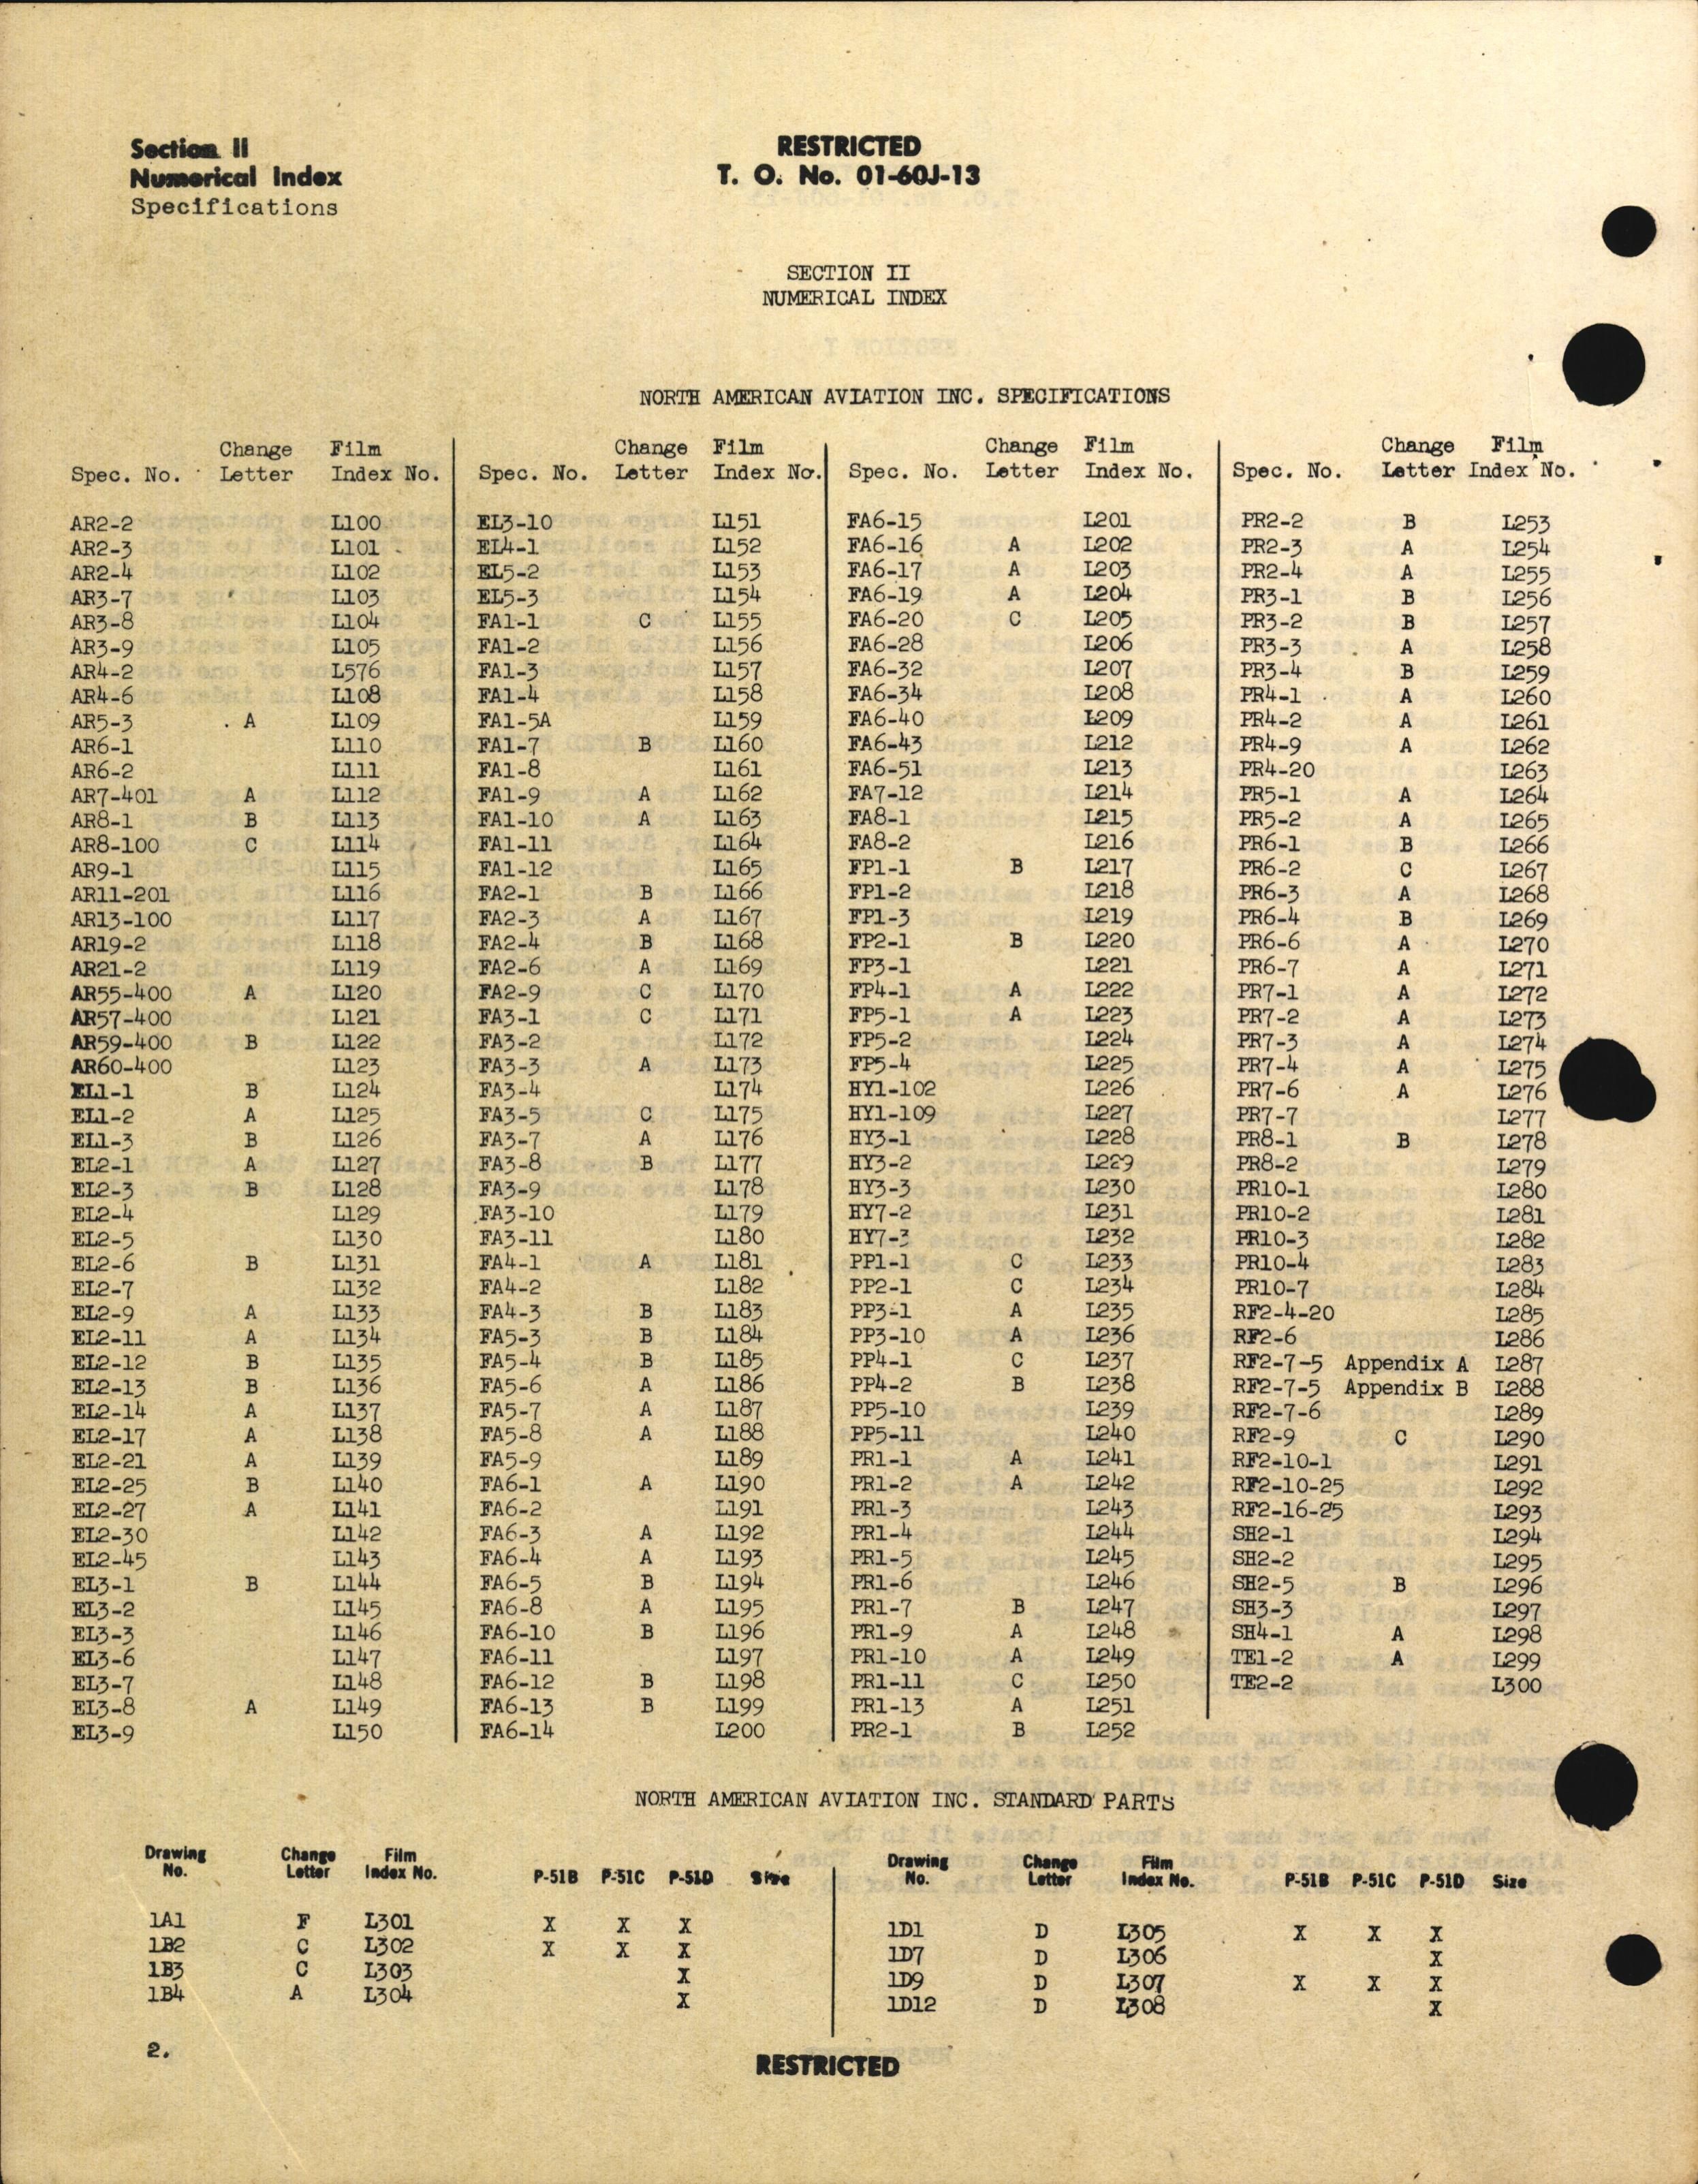 Sample page 4 from AirCorps Library document: Index of Drawings on Microfilm for P-51 Series Aircraft